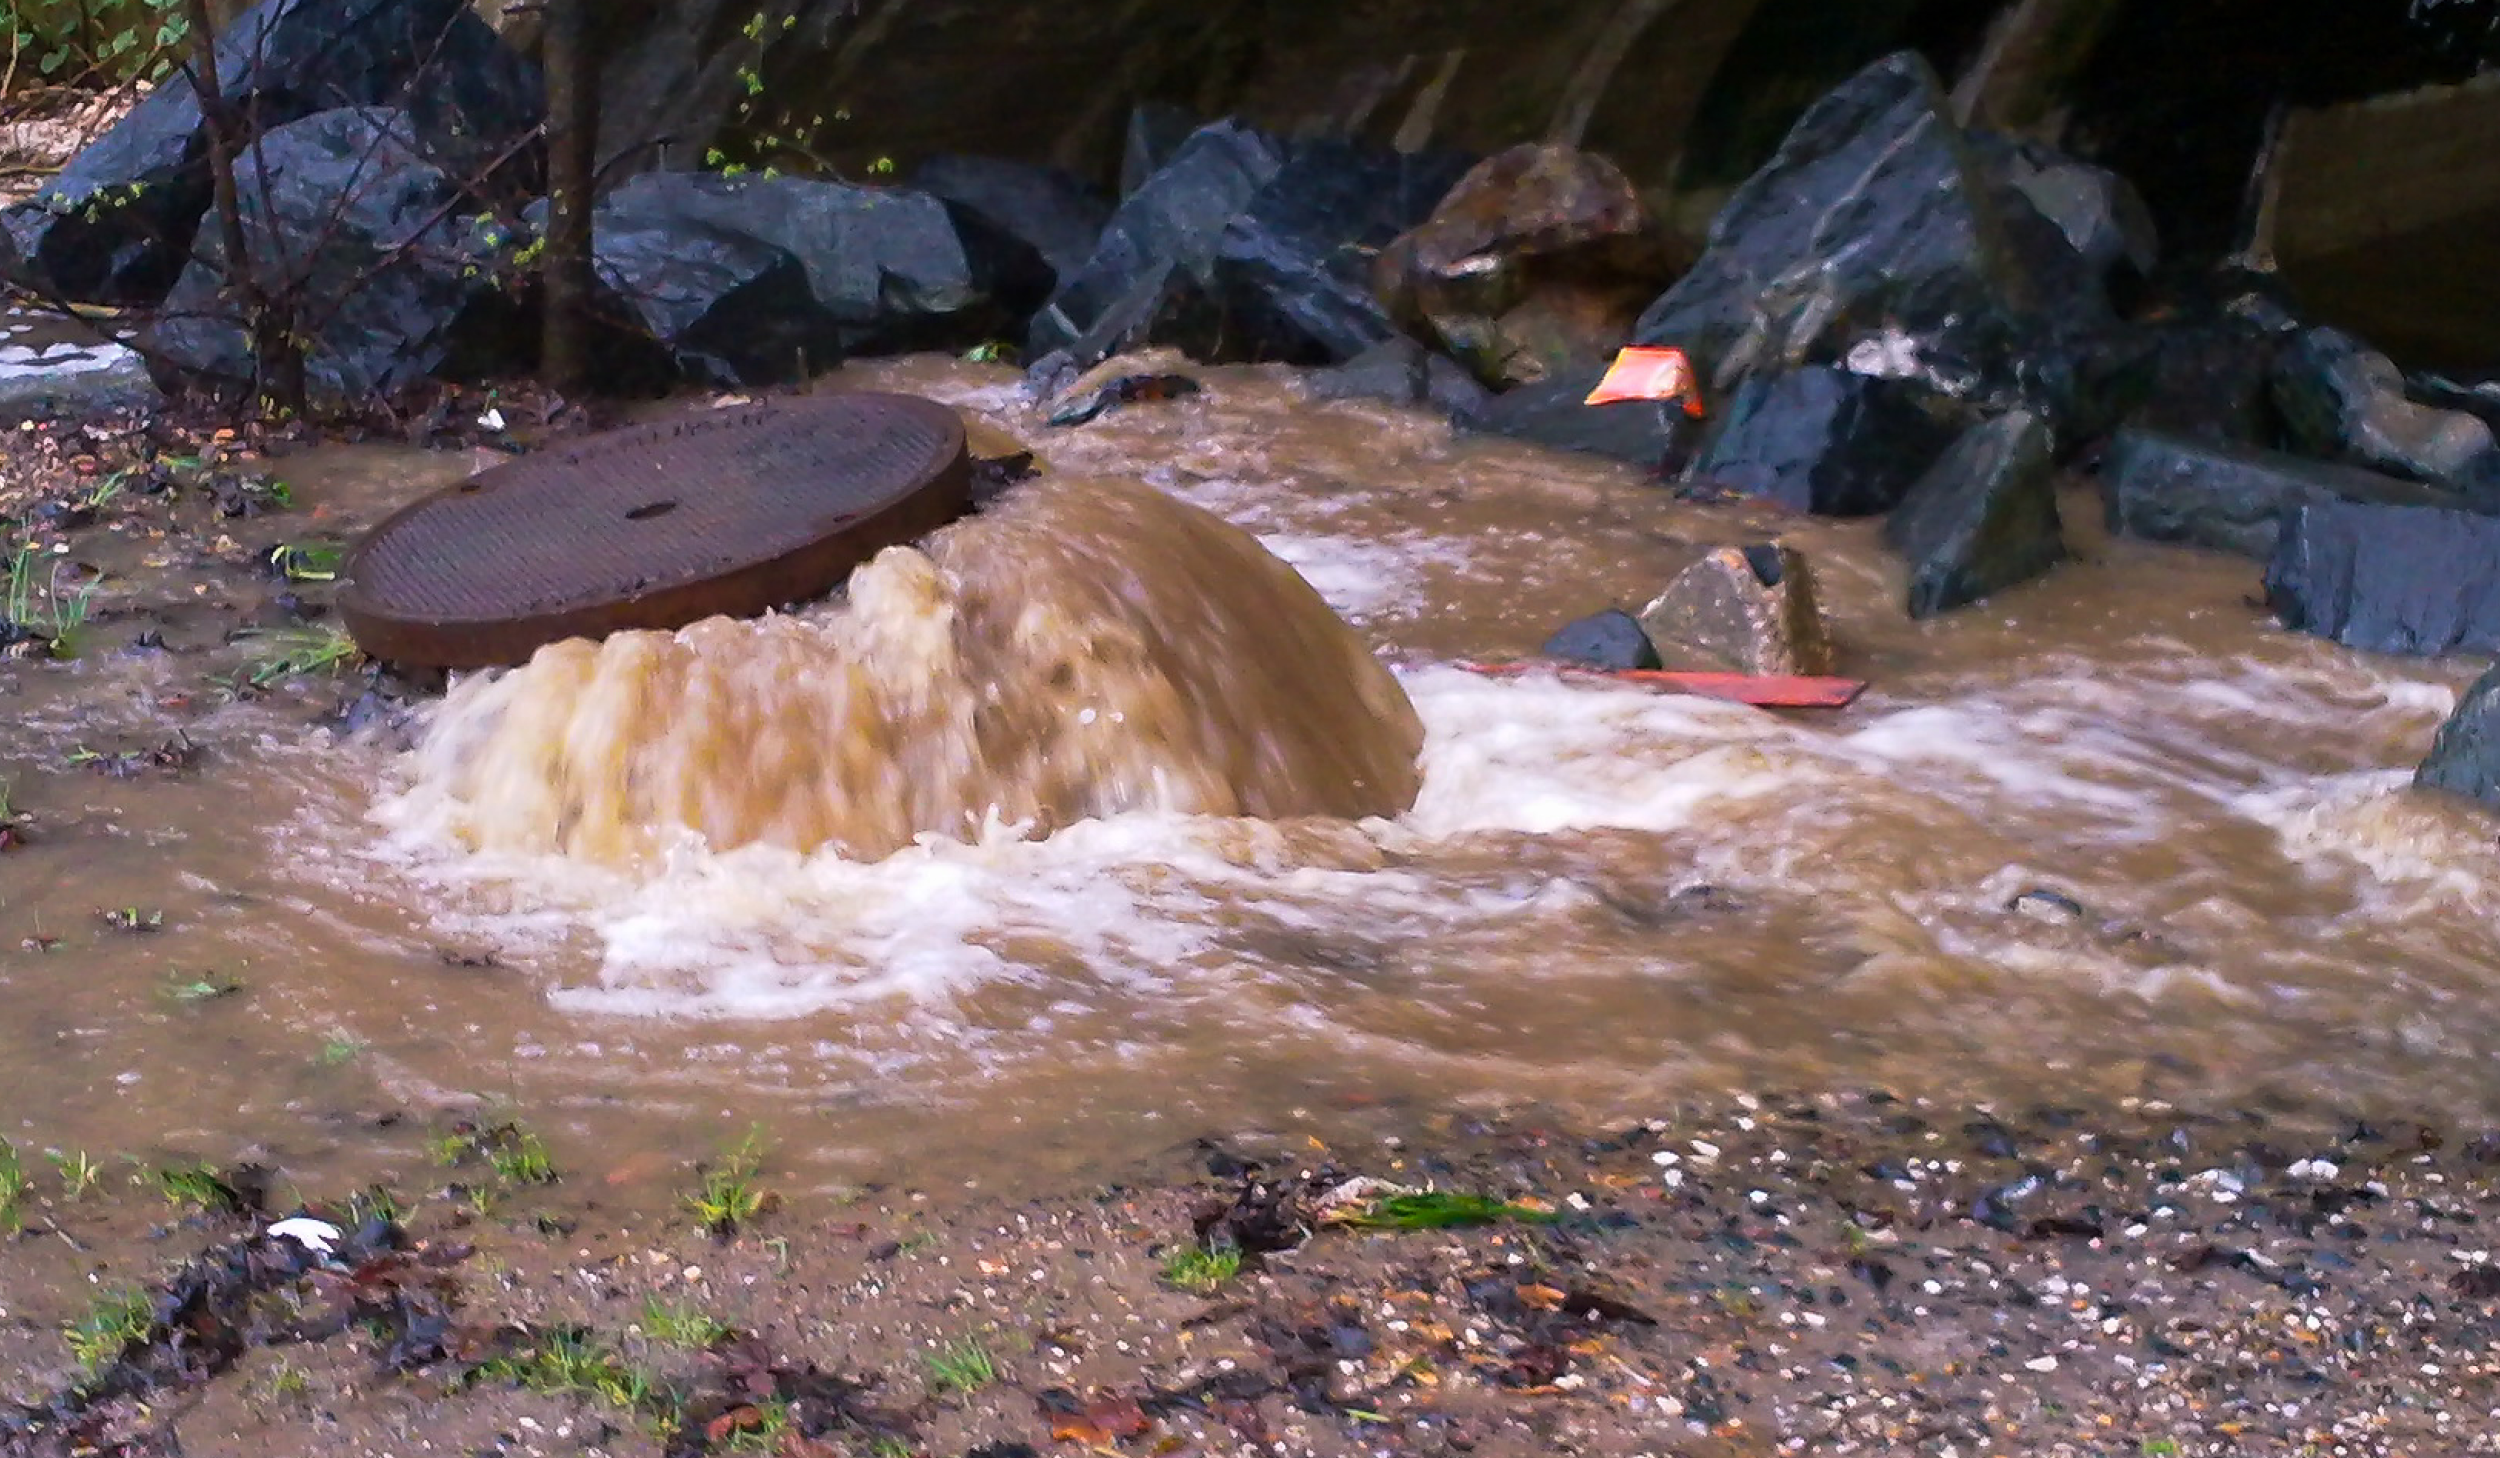 A sewer overflow discharging brown sewage into a local waterway.